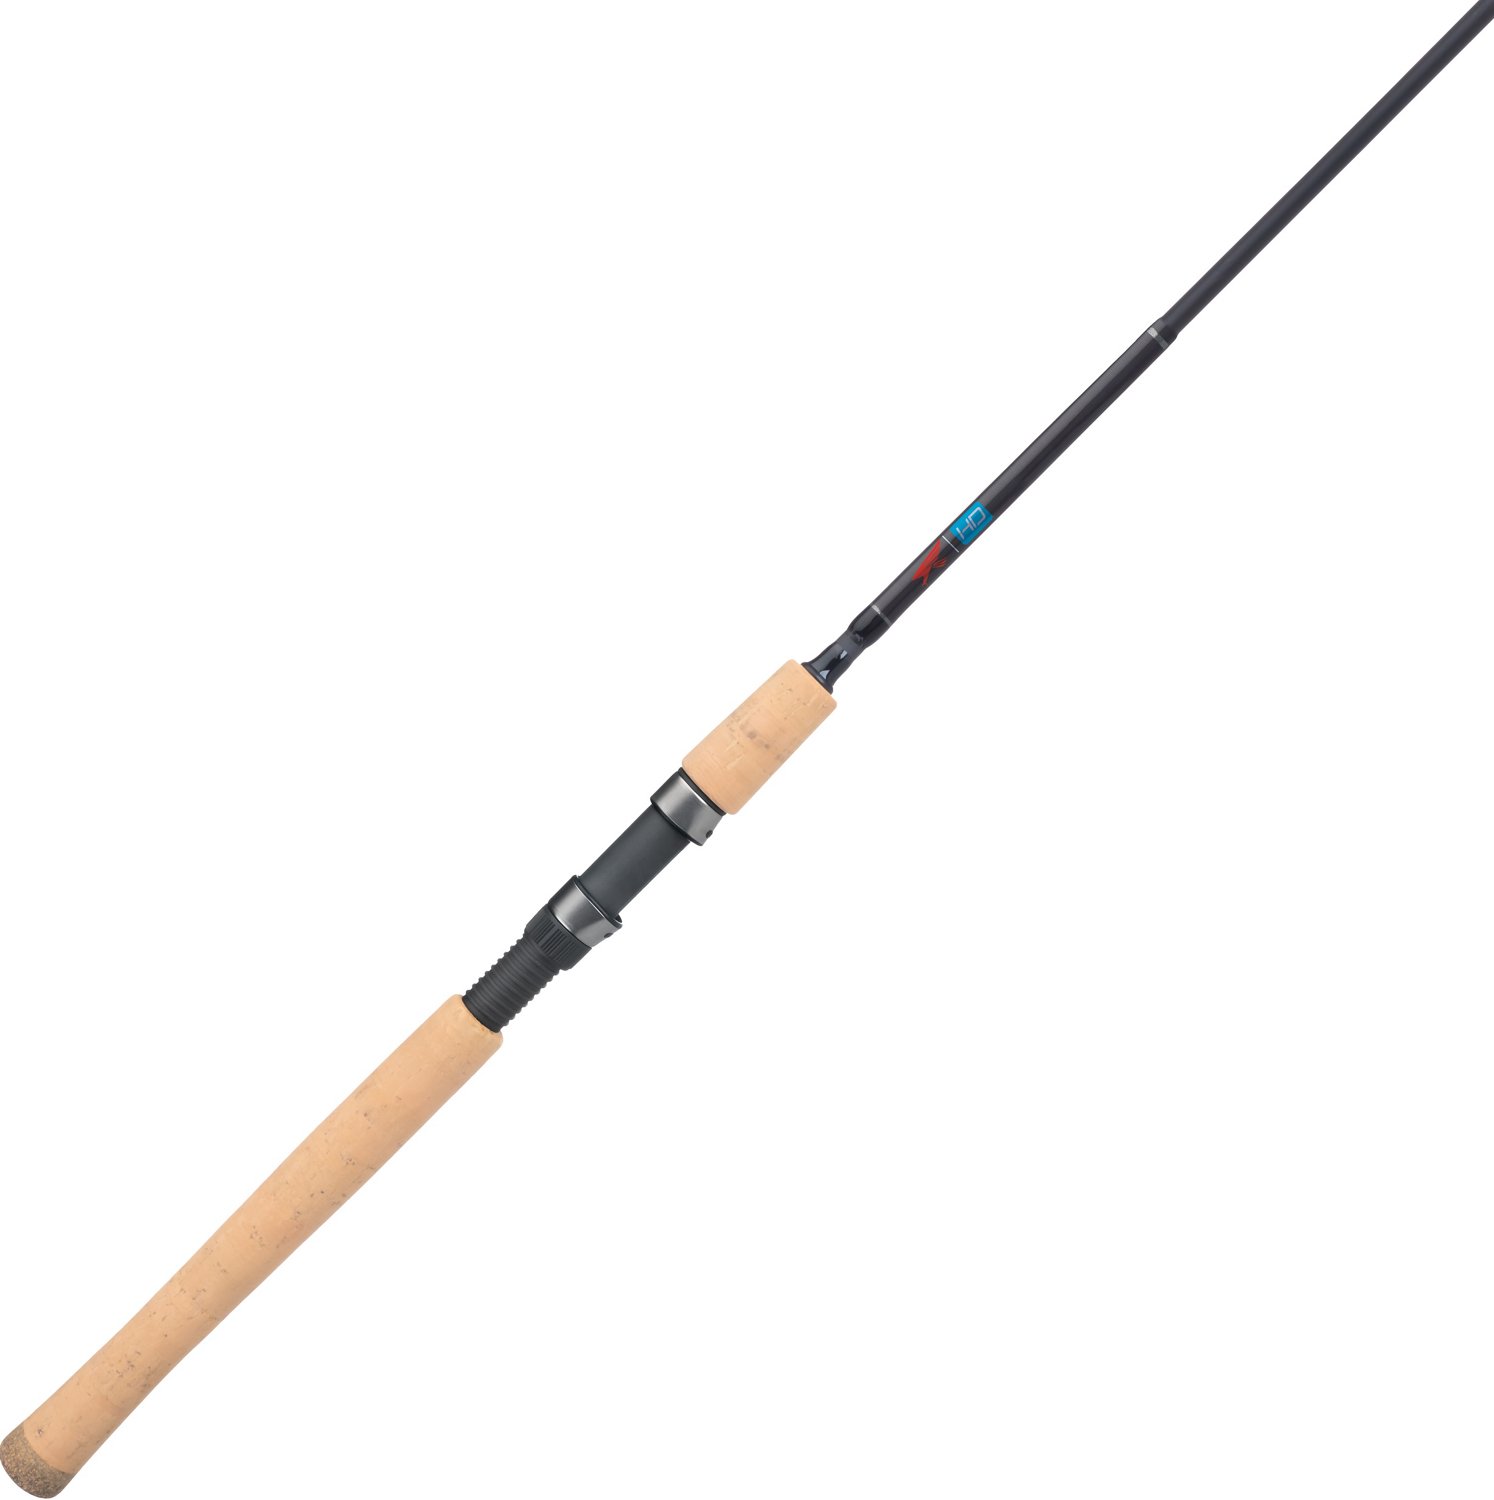 Academy Sports + Outdoors Falcon HD 7' Freshwater/Saltwater Spinning Rod